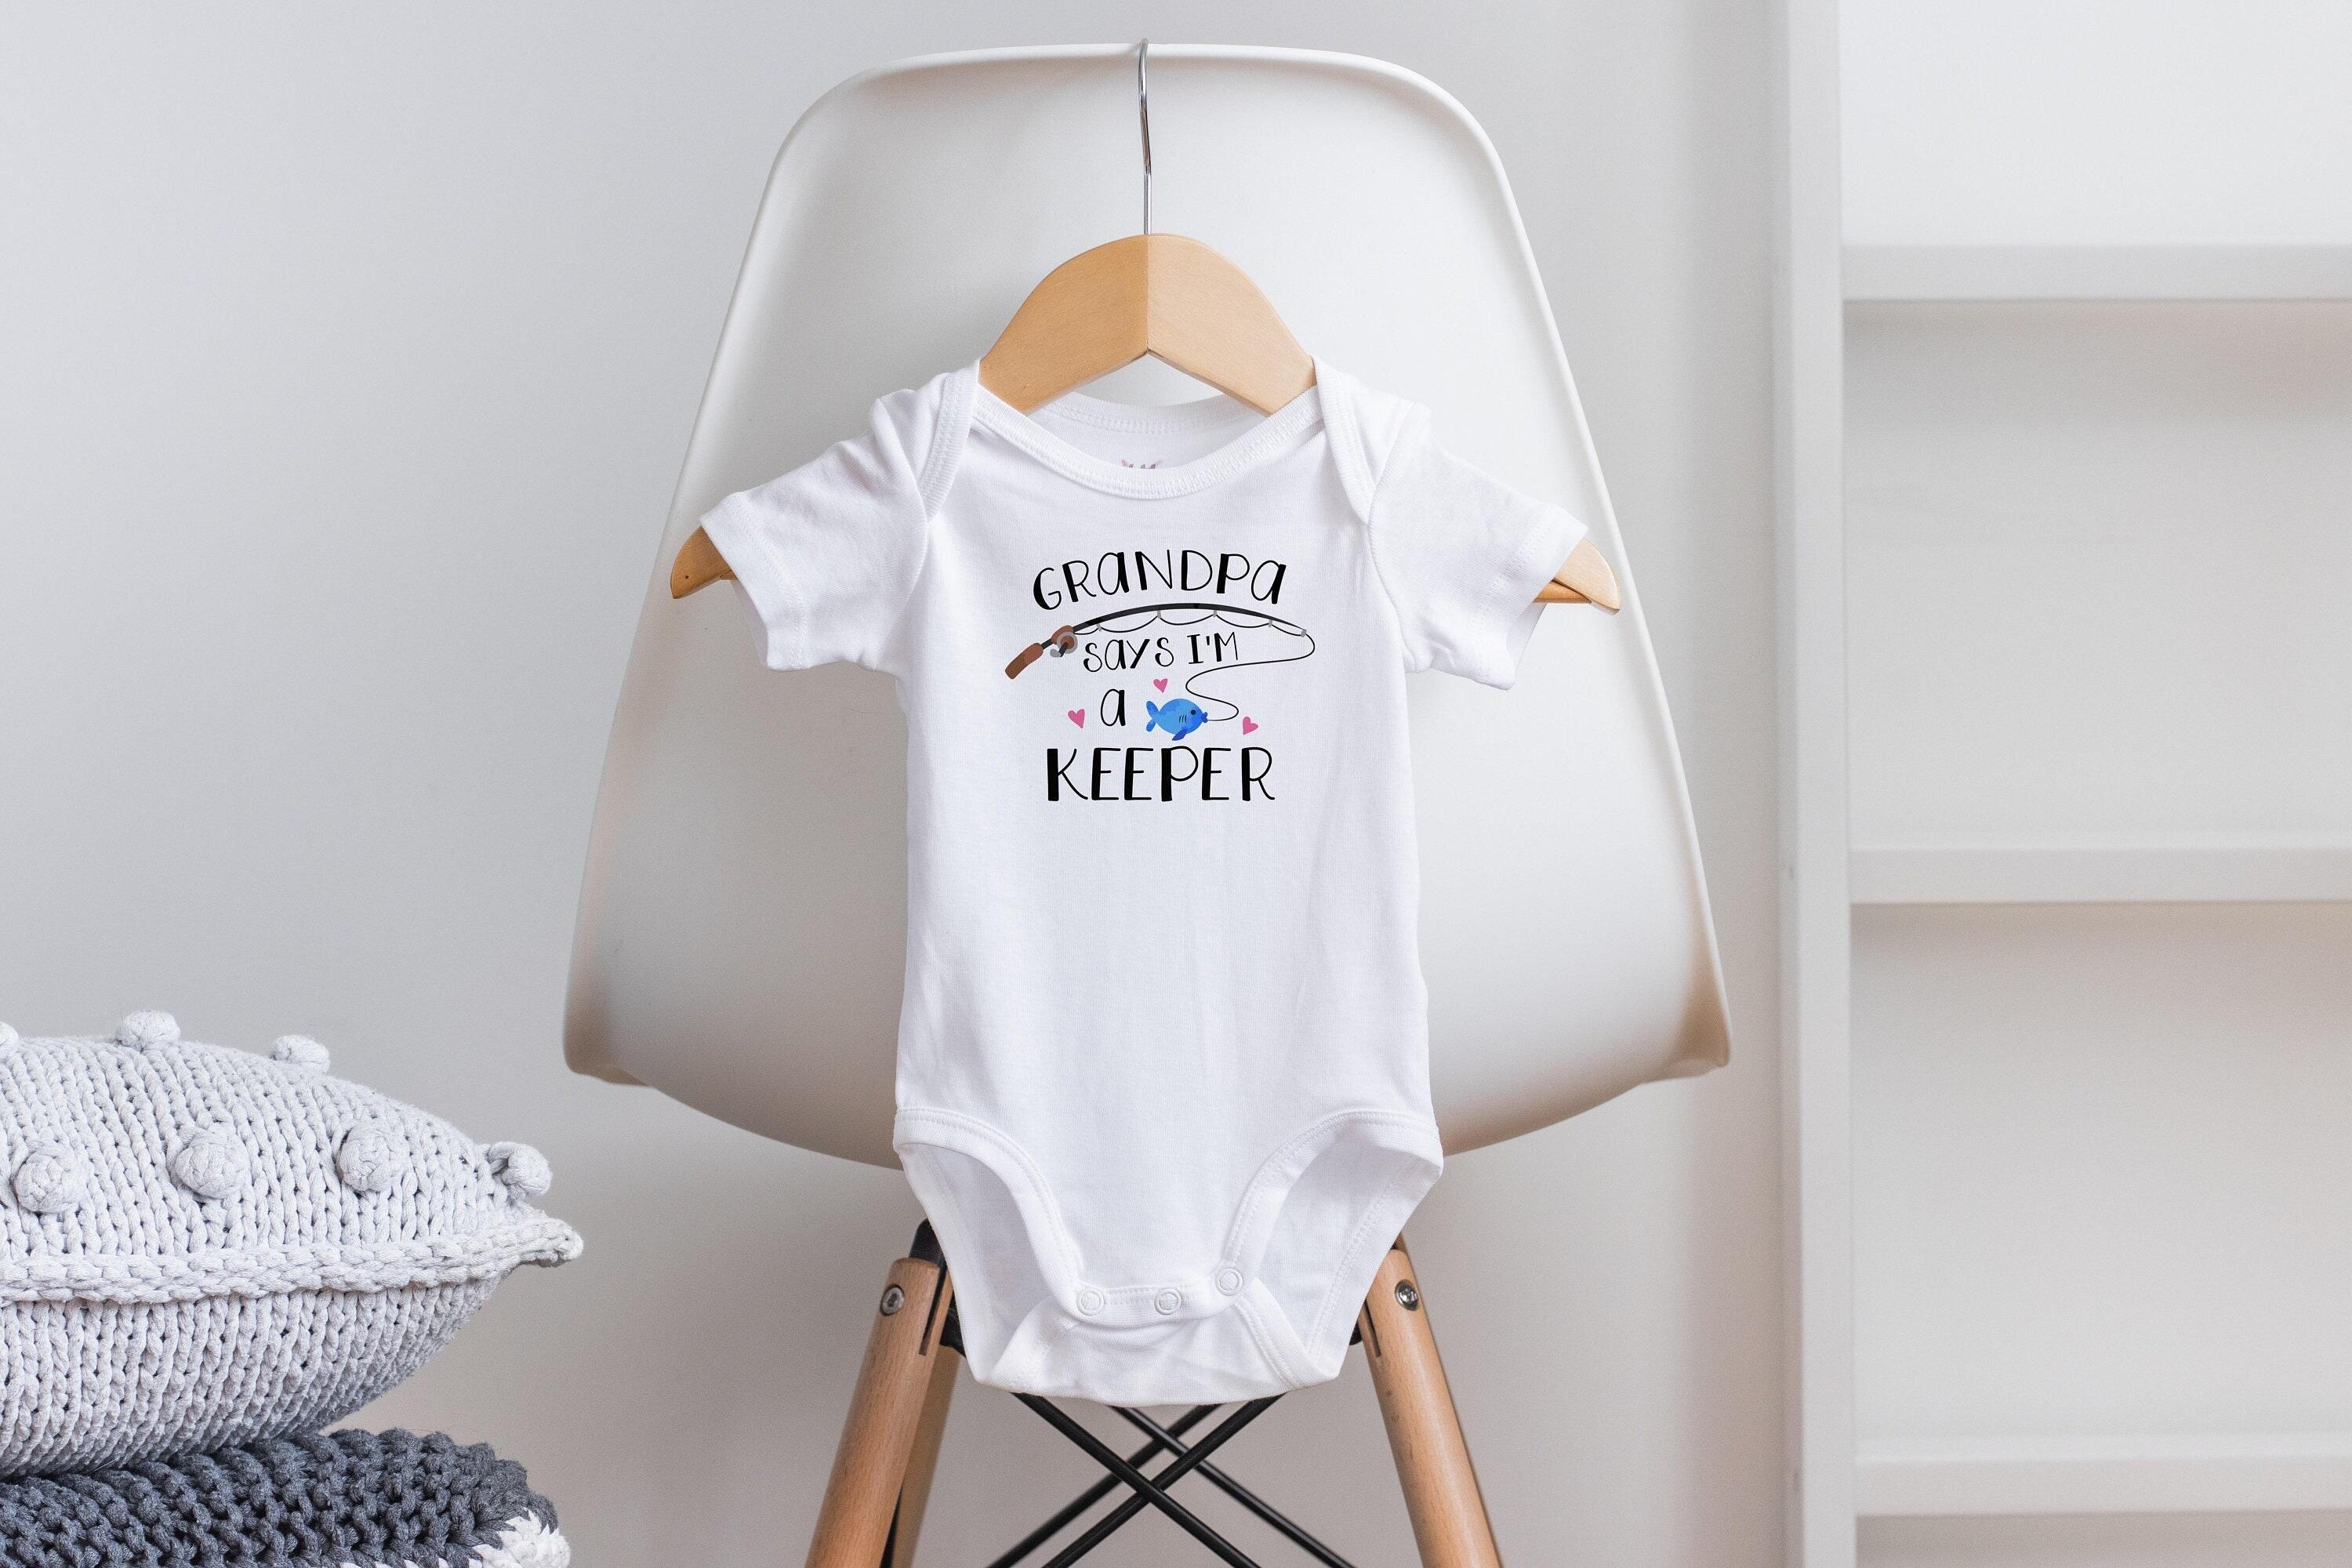 Clothing & Accessories :: Kids & Baby :: Baby Clothing :: Grandpa